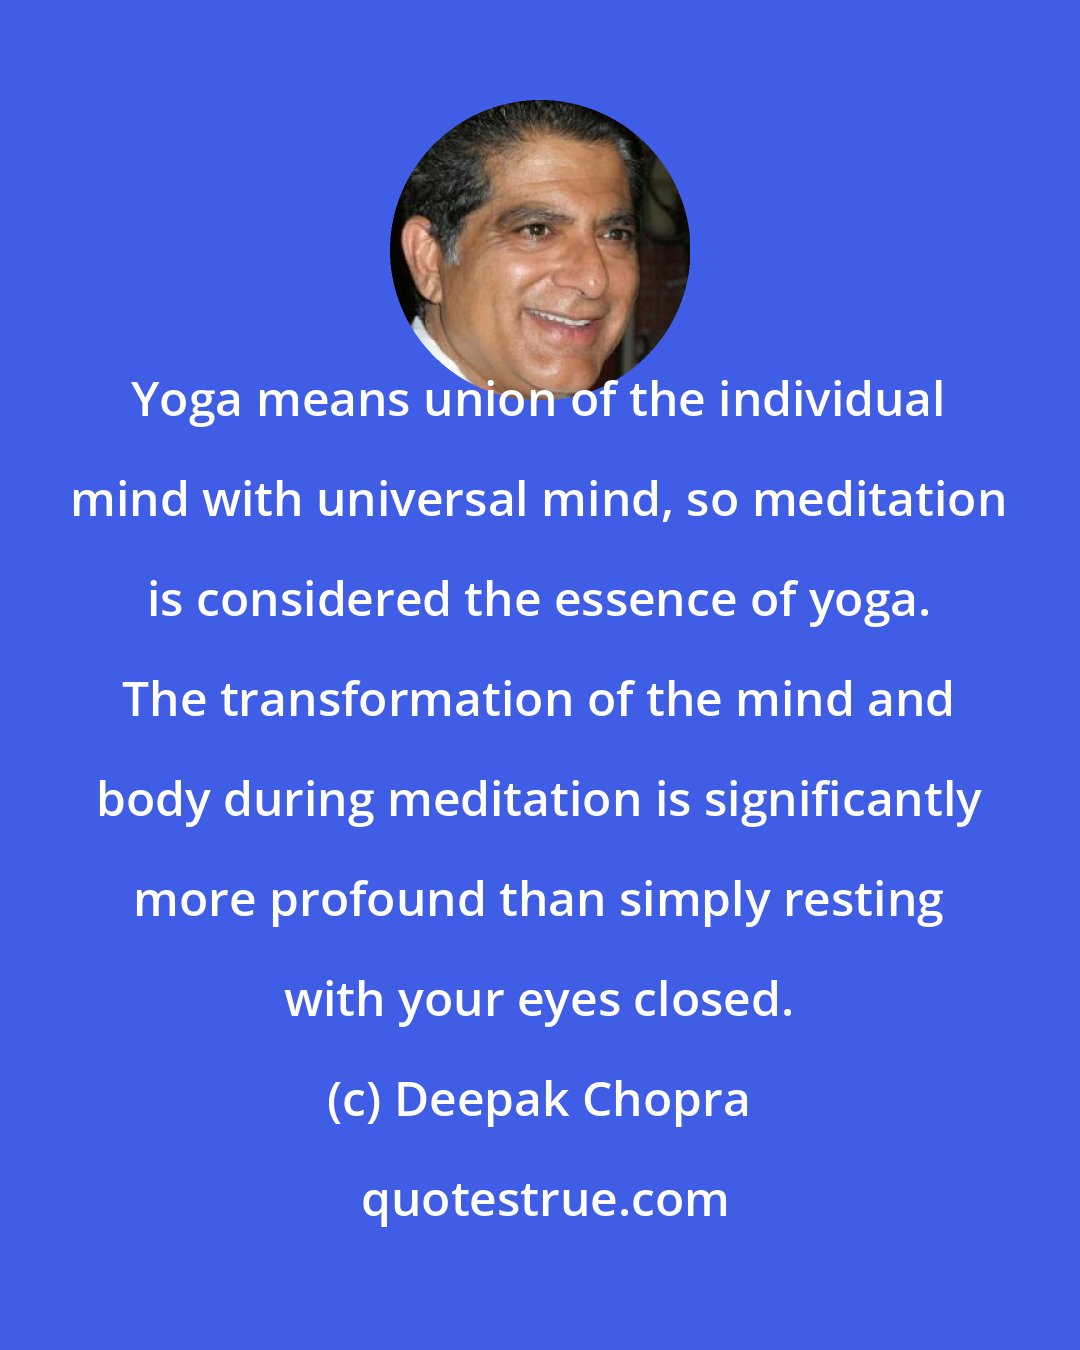 Deepak Chopra: Yoga means union of the individual mind with universal mind, so meditation is considered the essence of yoga. The transformation of the mind and body during meditation is significantly more profound than simply resting with your eyes closed.